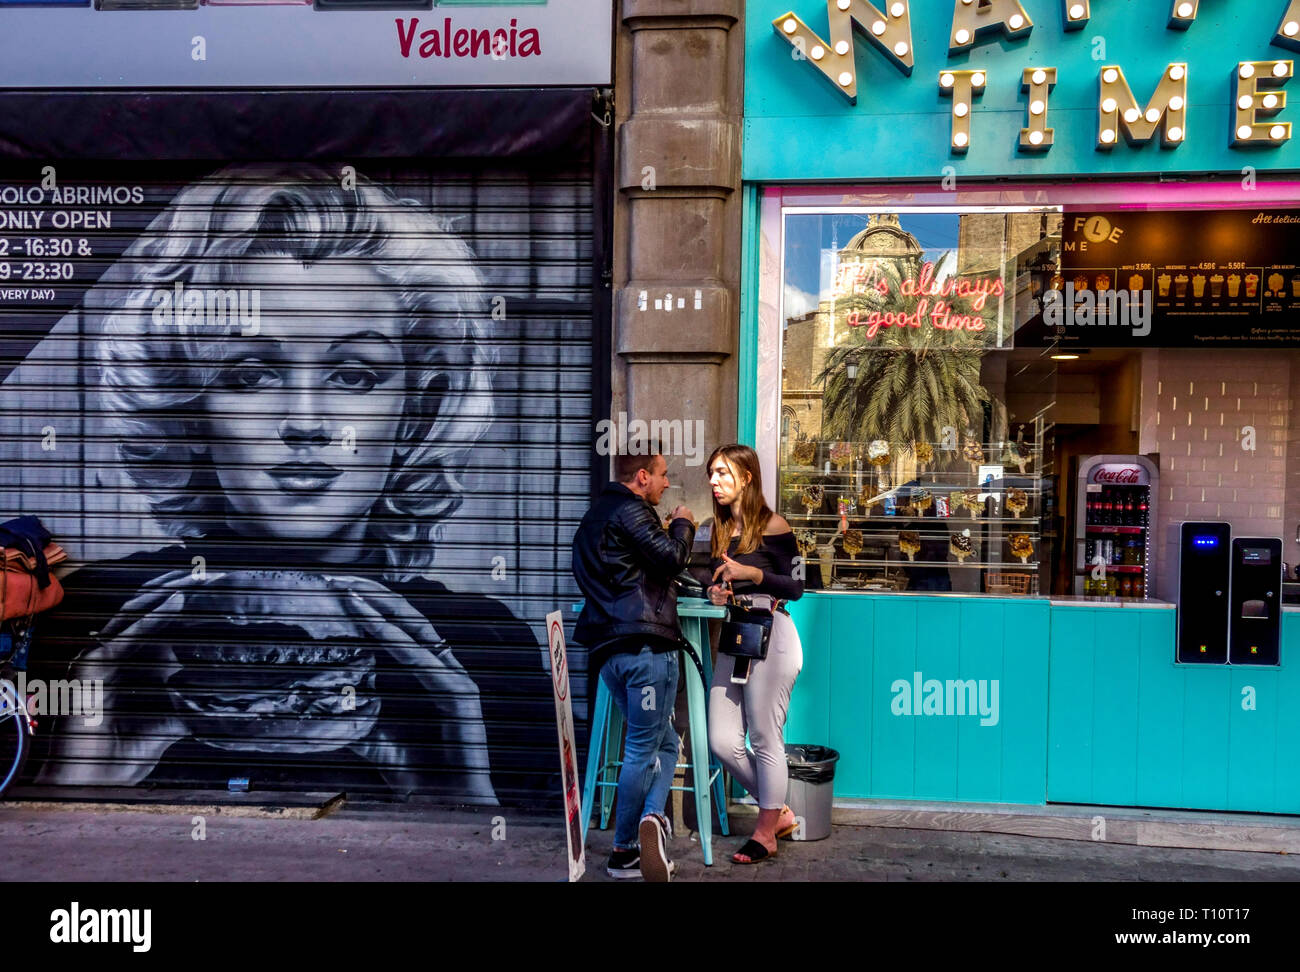 Valencia street art Old Town with Marilyn Monroe eating burger Valencia streets graffiti Spain life scene young couple city Stock Photo